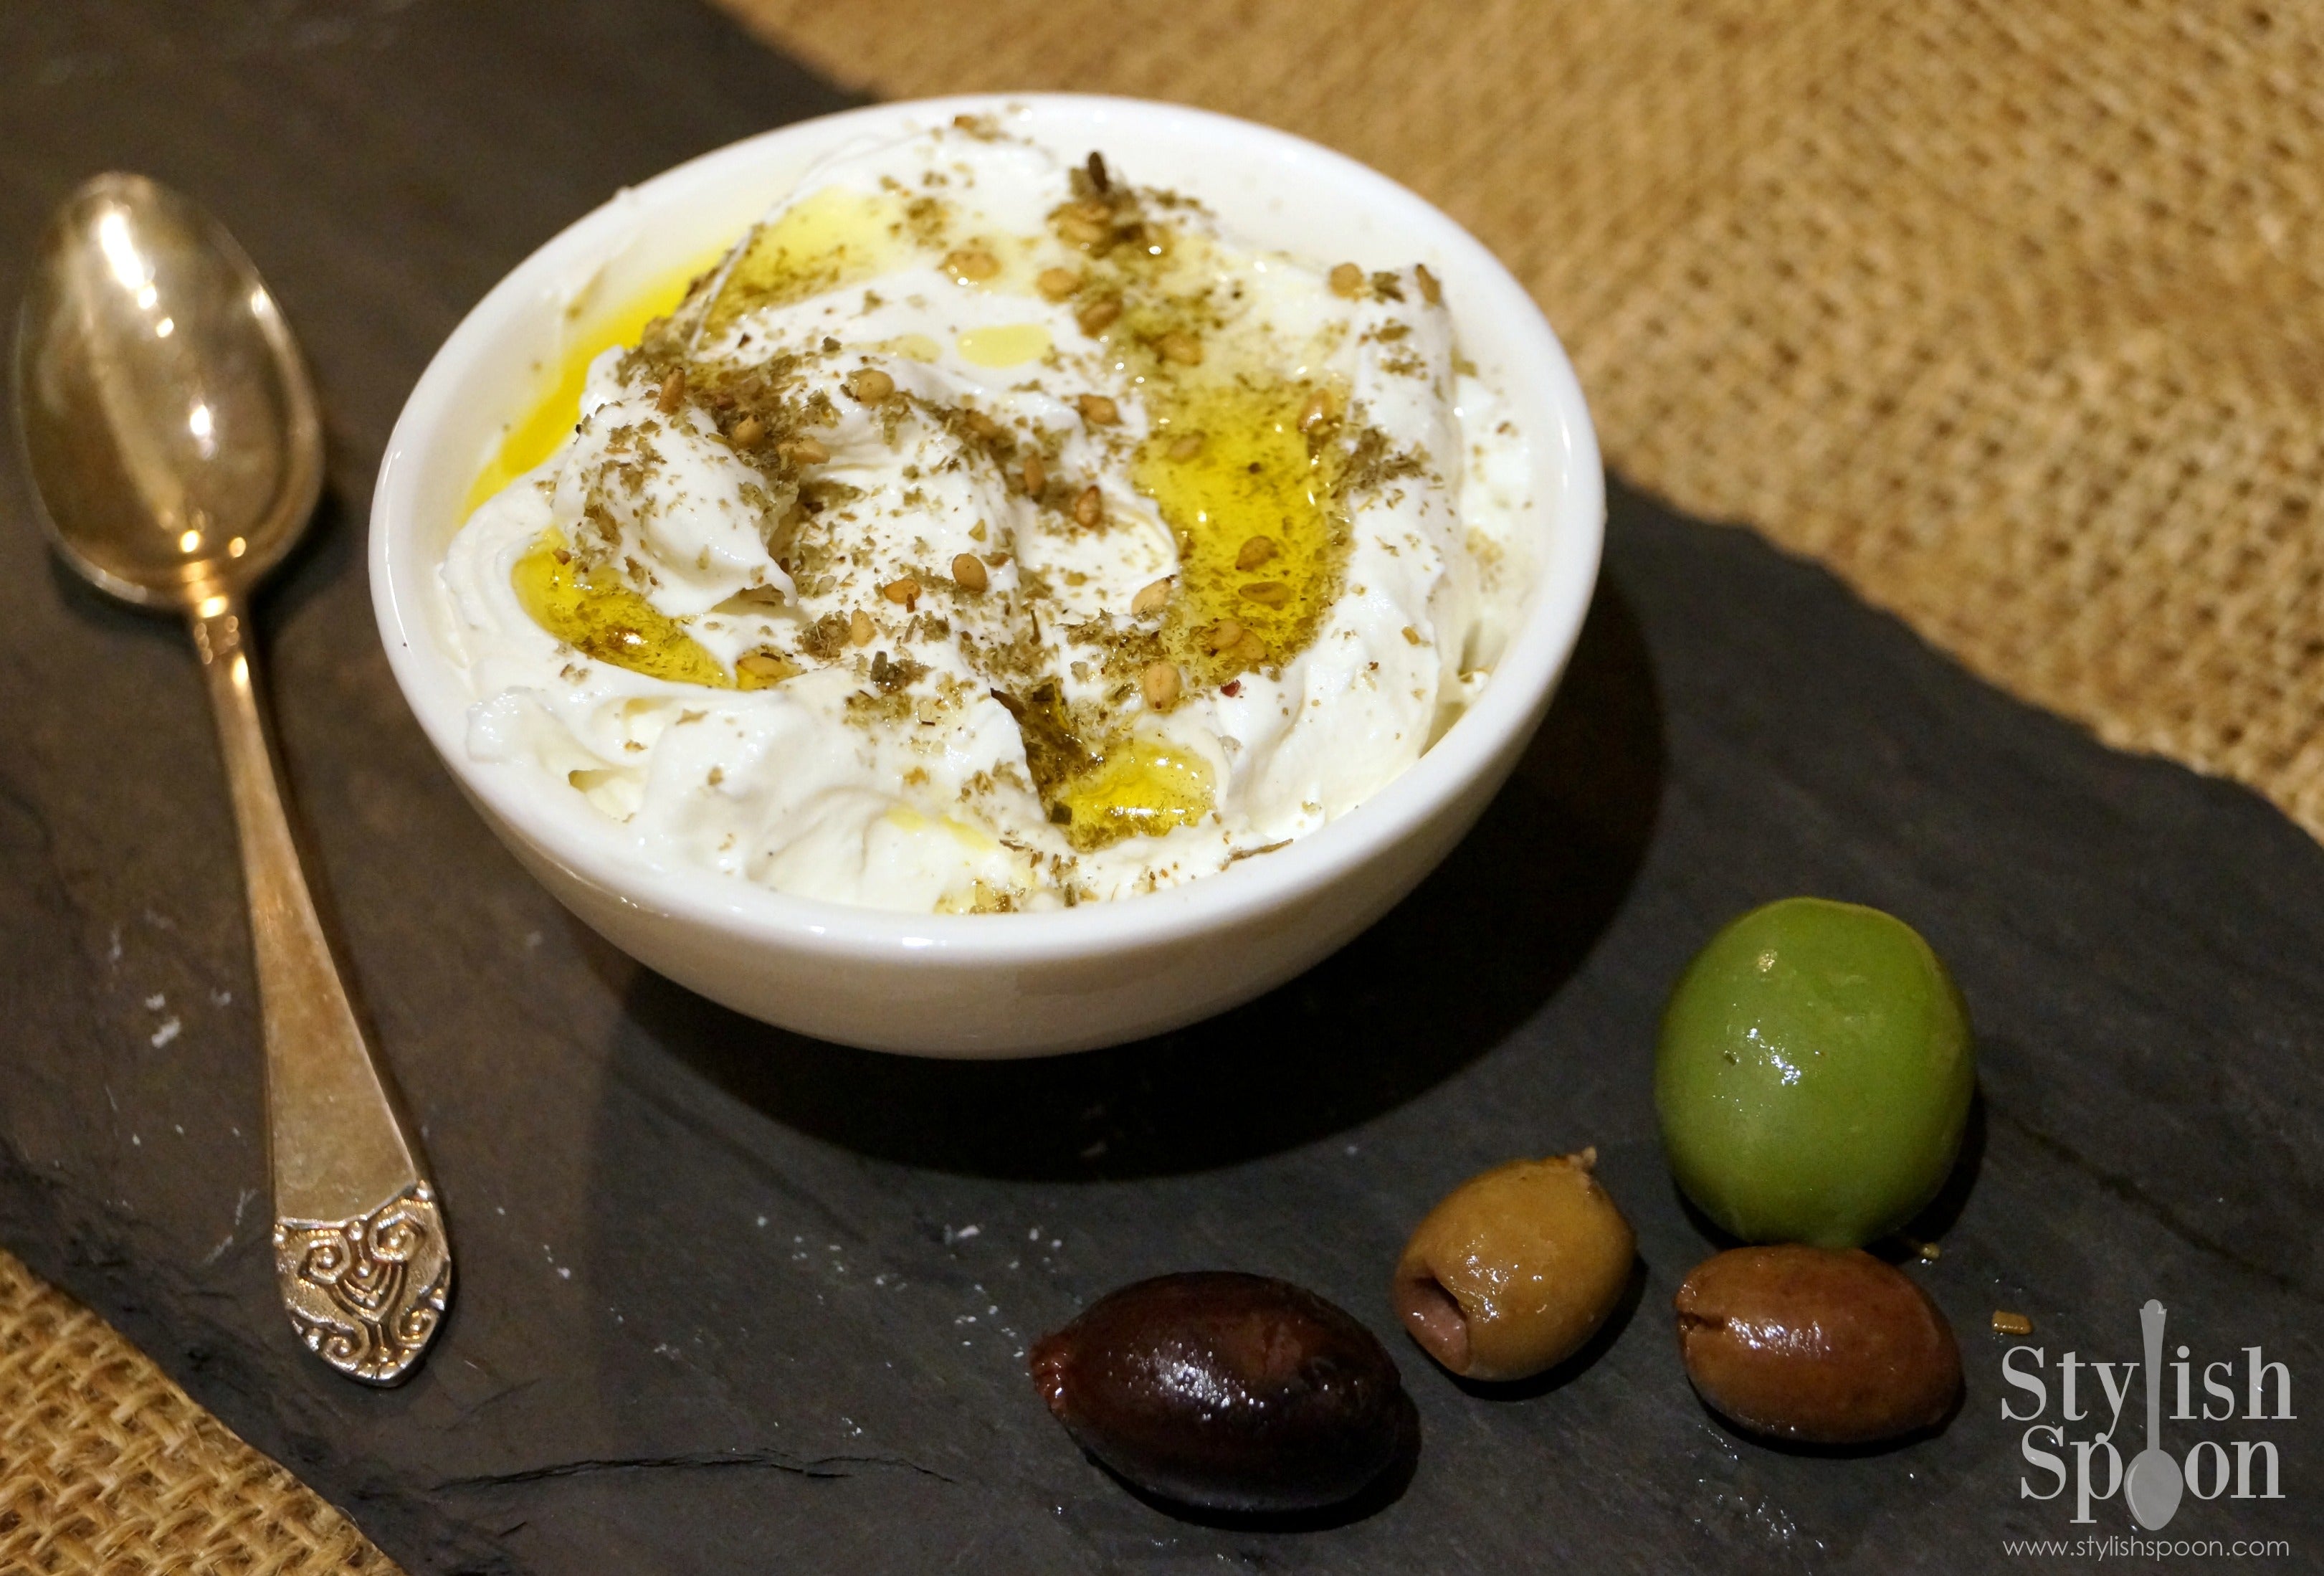 Labneh Middle Eastern Strained Yogurt with Za'atar Mezze Plate